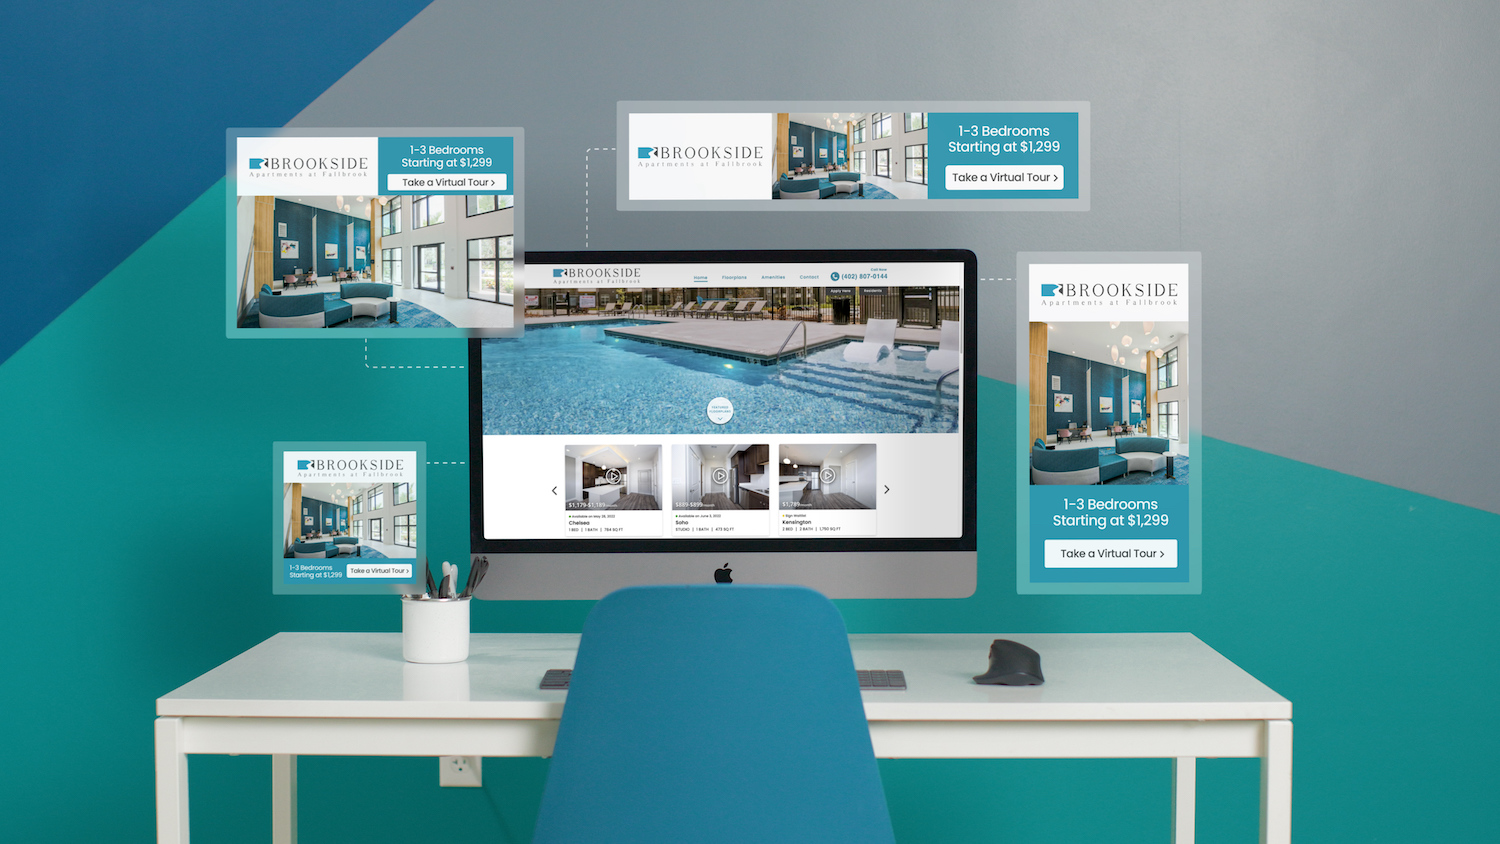 Collage of images showing various digital ads for an apartment community surrounding a computer showing the homepage of the community's website.